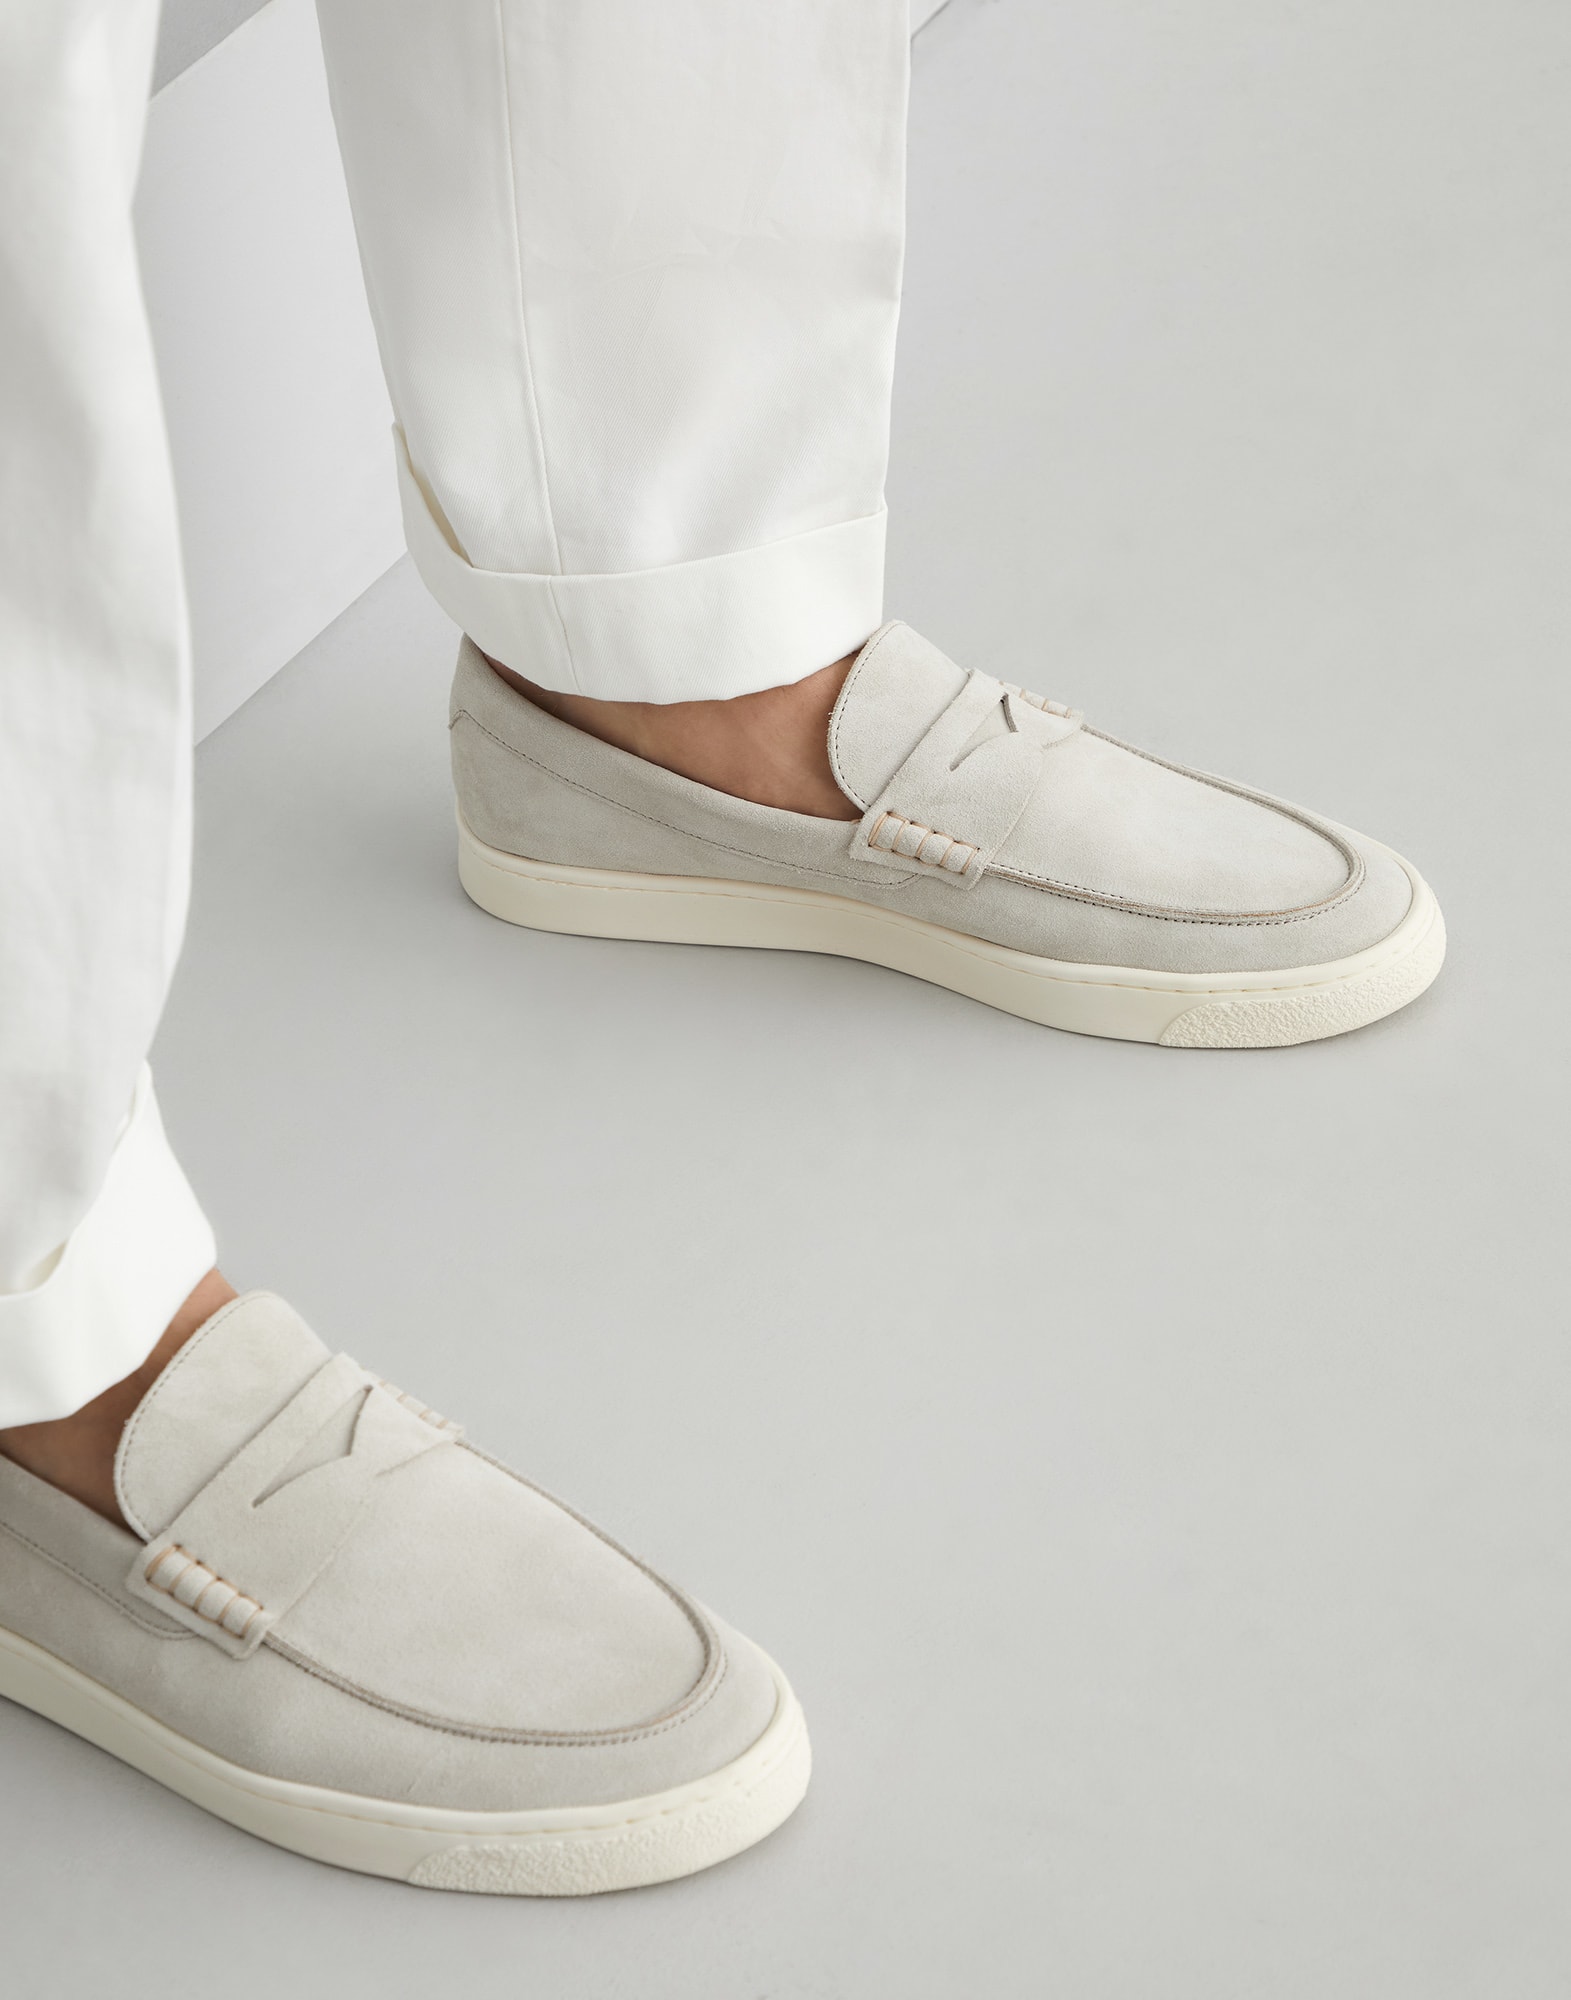 Loafer sneakers Sand Man - Brunello Cucinelli